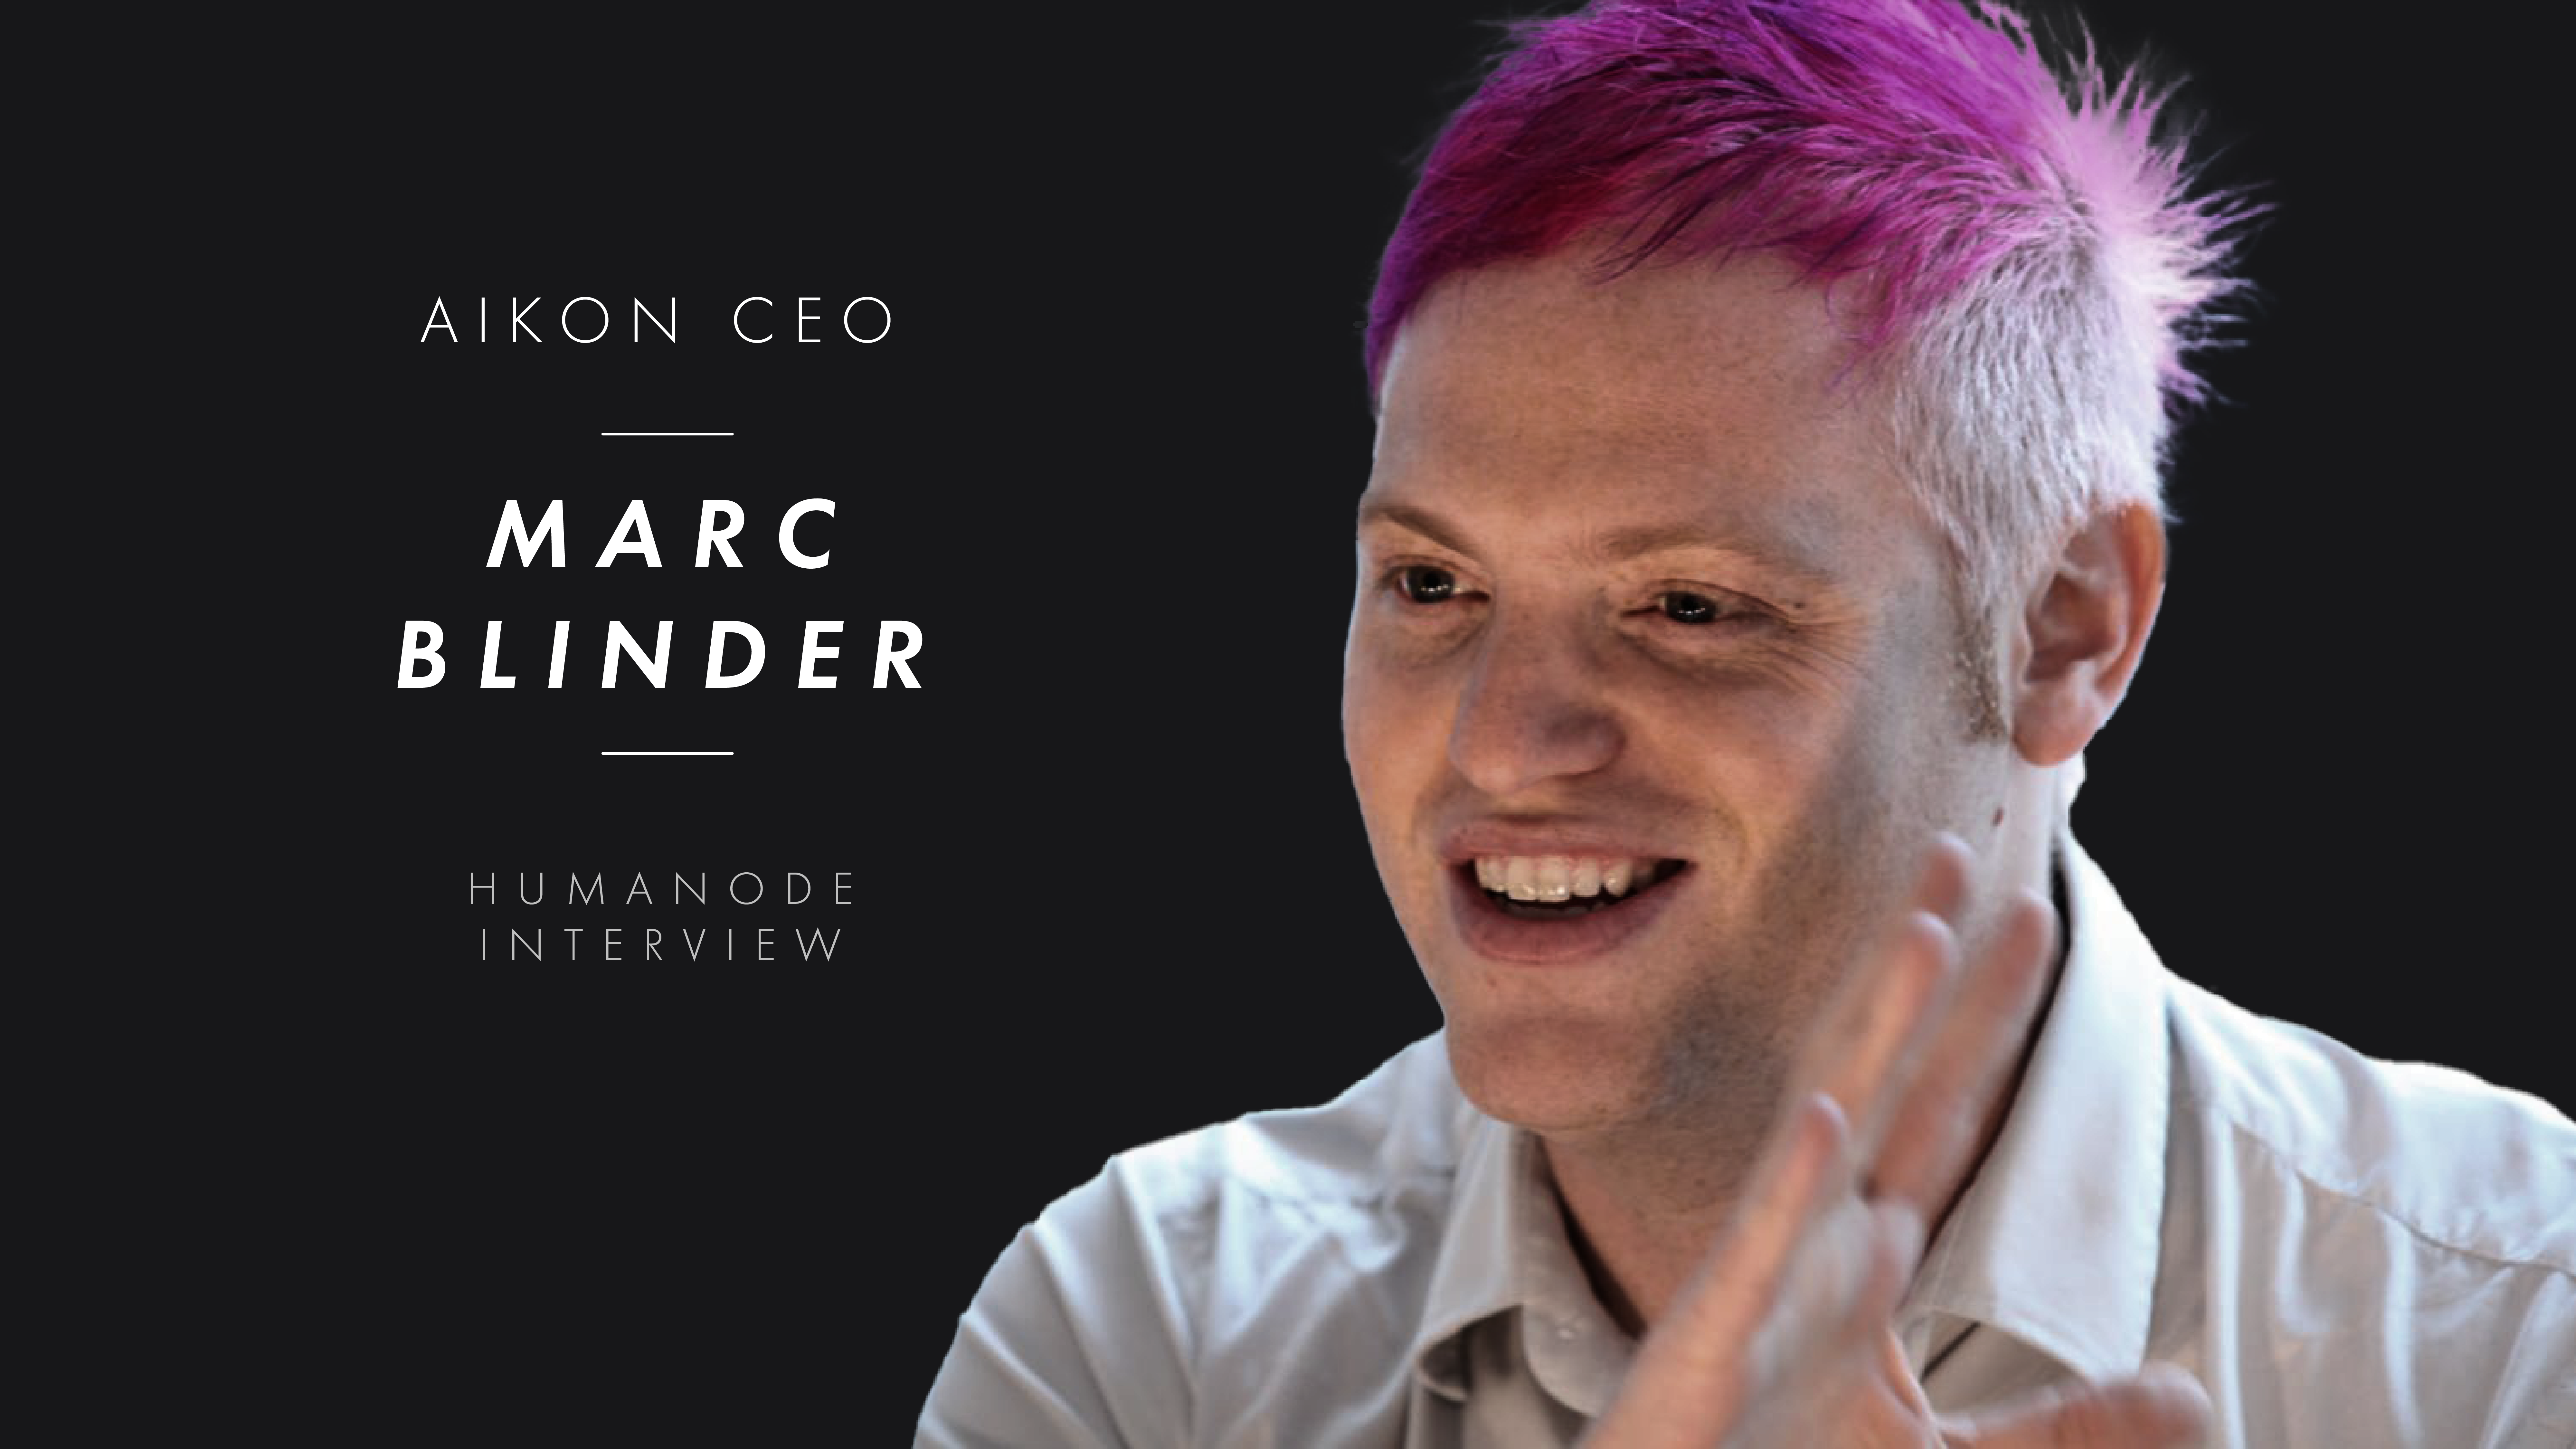 Interview with Marc Blinder, Co-Founder and CEO of AIKON